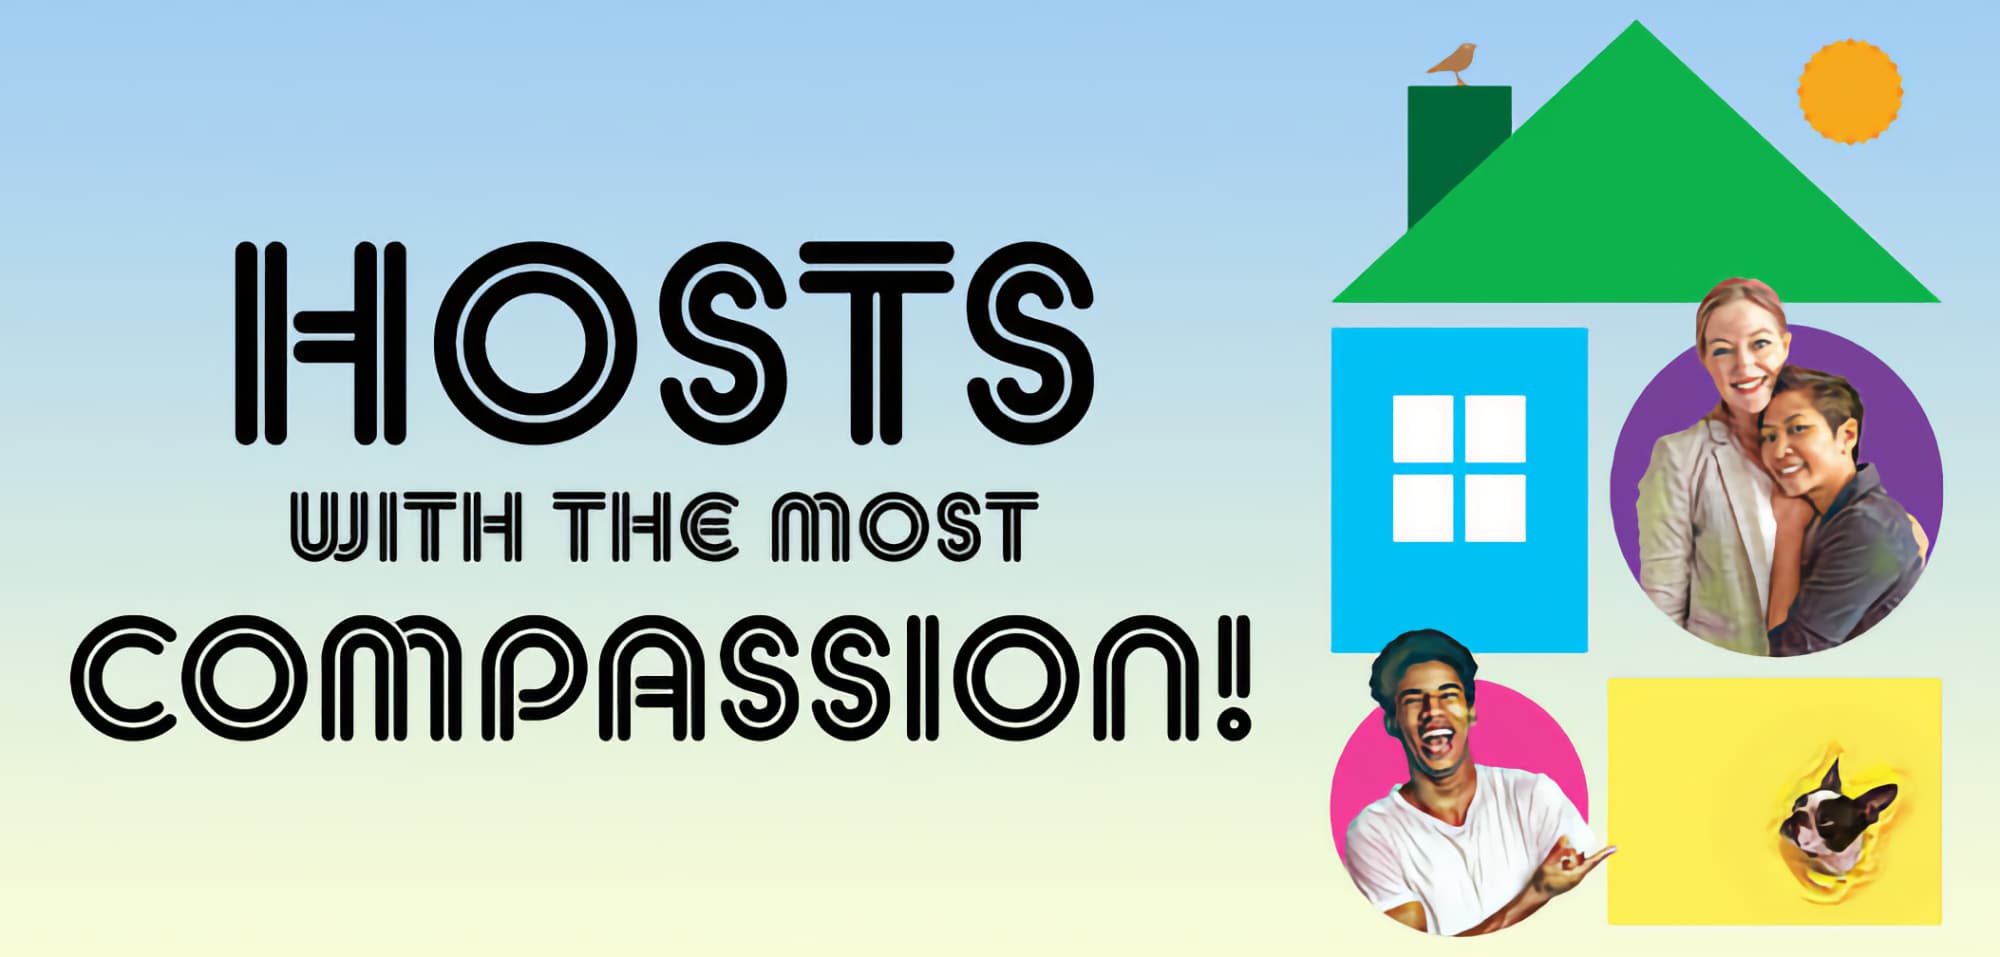 Hosts with the most compassion